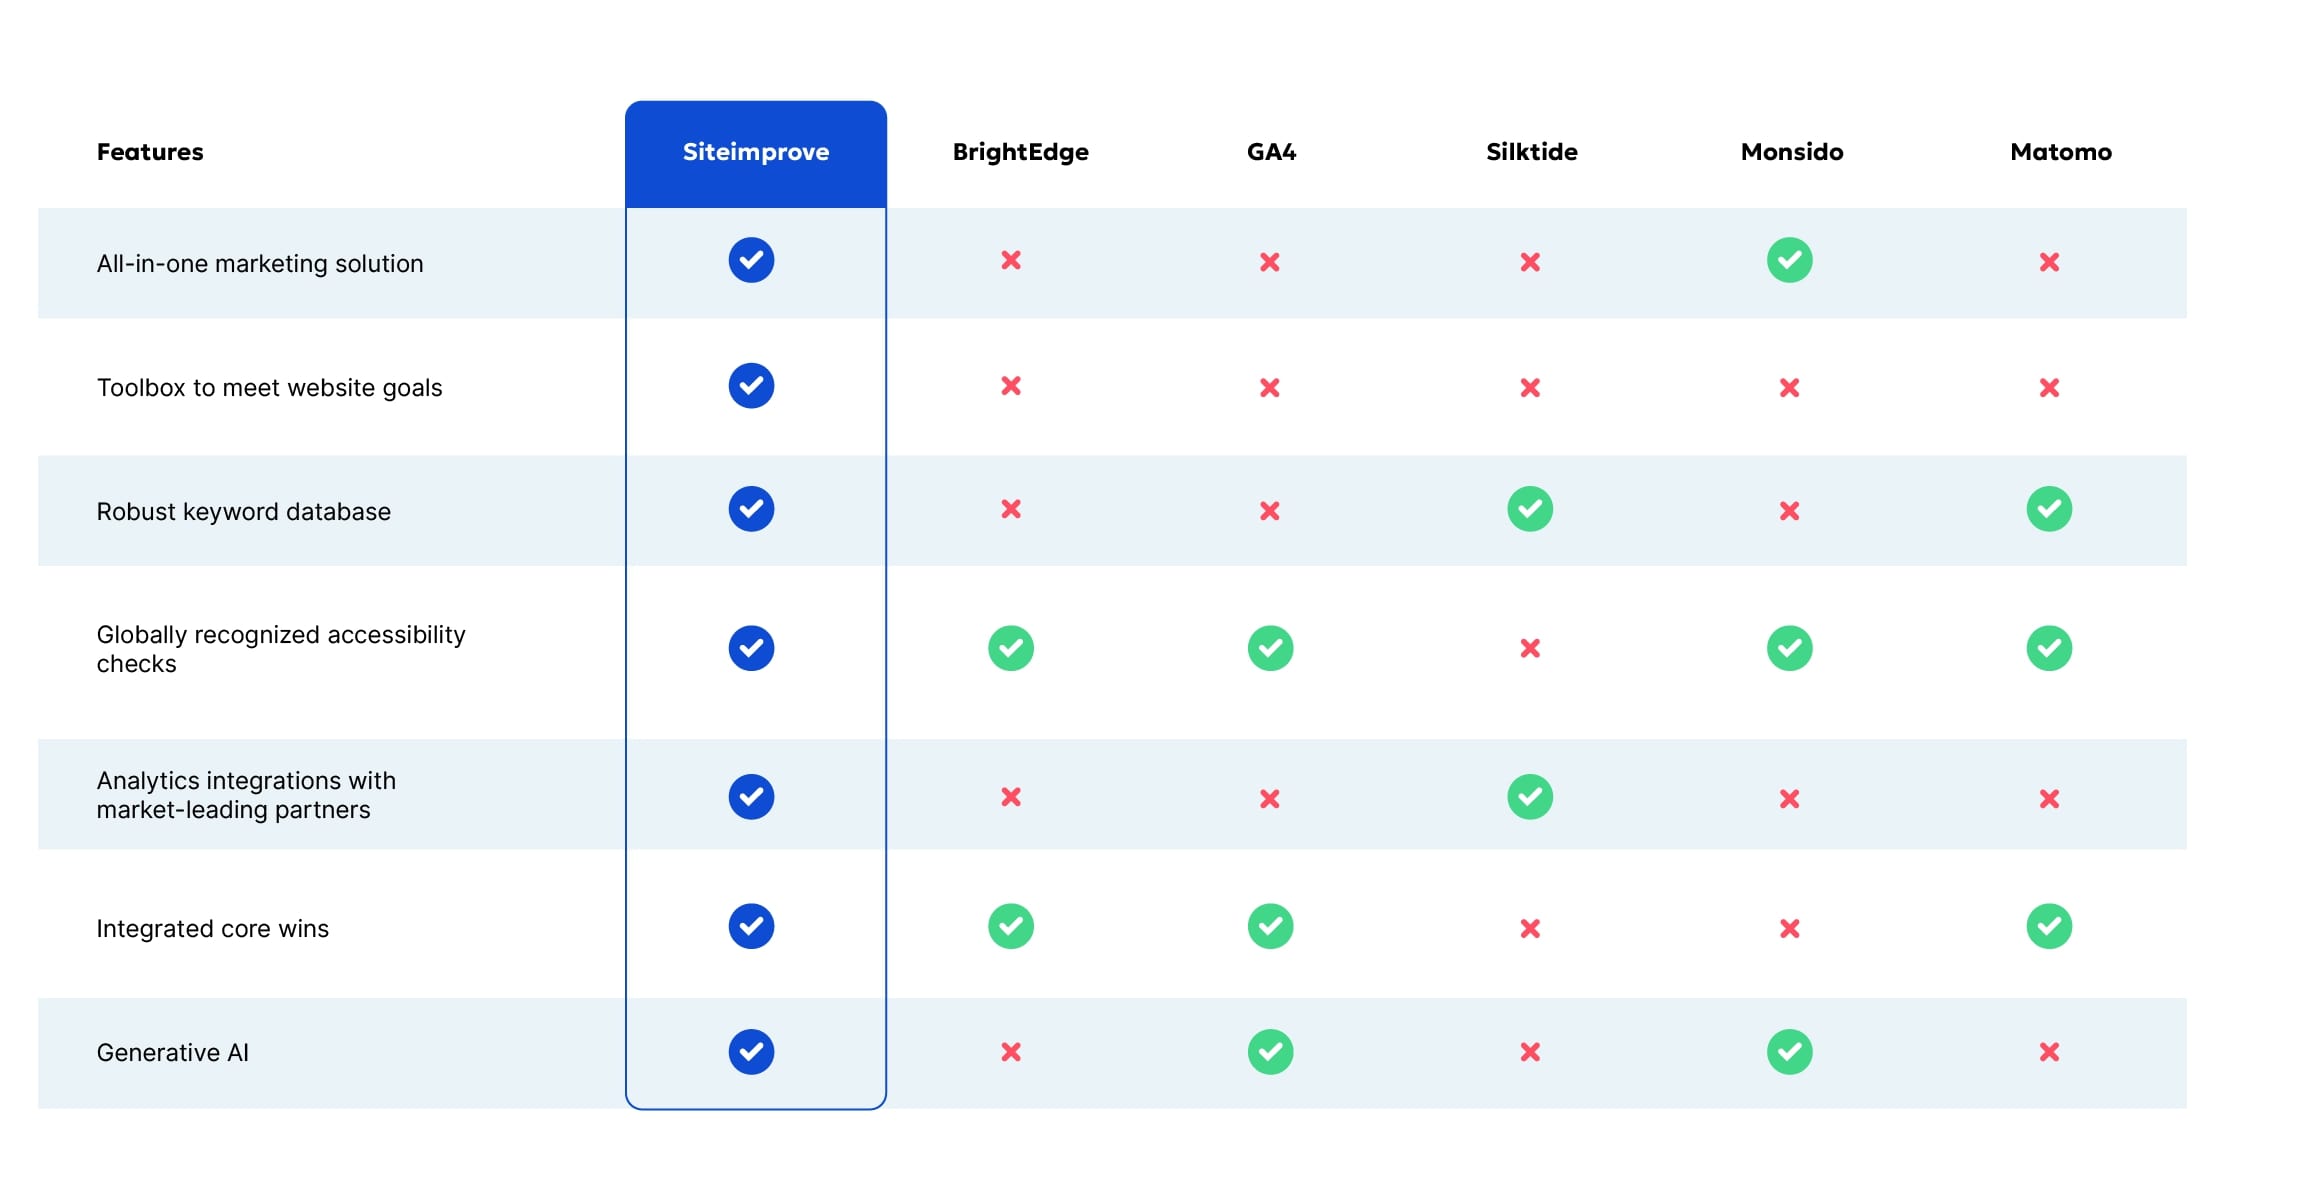 Feature comparison chart among various digital marketing tools including Siteimprove, BrightEdge, GA4, Sliktide, Monsido, and Matomo. Siteimprove stands out with a checkmark against every feature, indicating a full suite of capabilities ranging from an all-in-one marketing solution to generative AI. The other tools show a mix of checkmarks and crosses, with none matching Siteimprove's comprehensive feature set. Monsido follows as the second most feature-rich tool, while BrightEdge and GA4 have the least features ticked off.